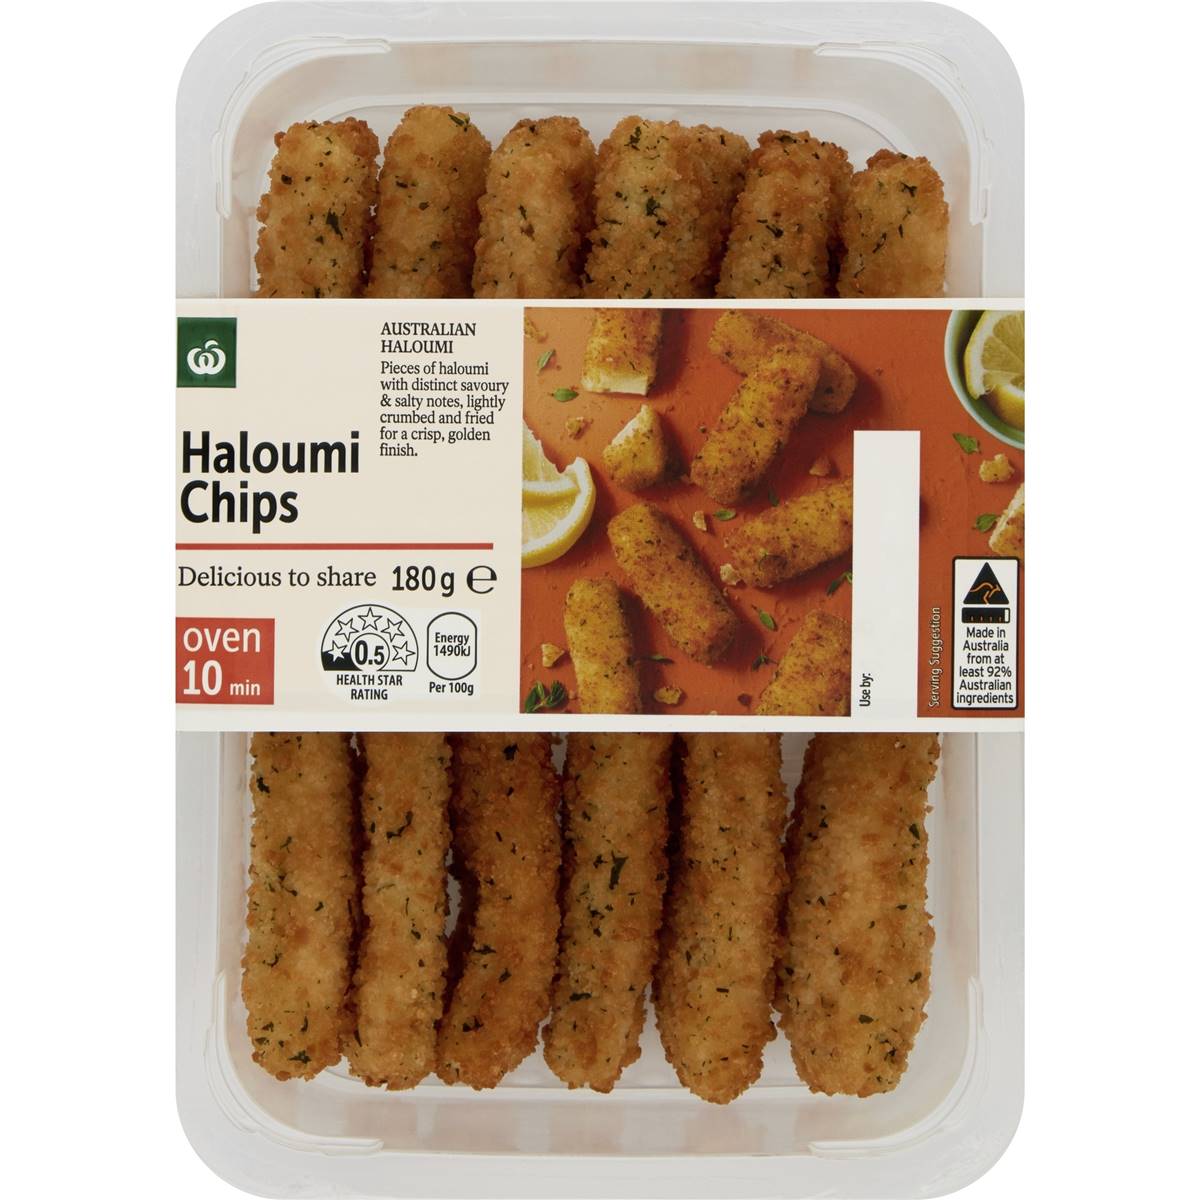 Calories in Woolworths Crumbed Haloumi Chips